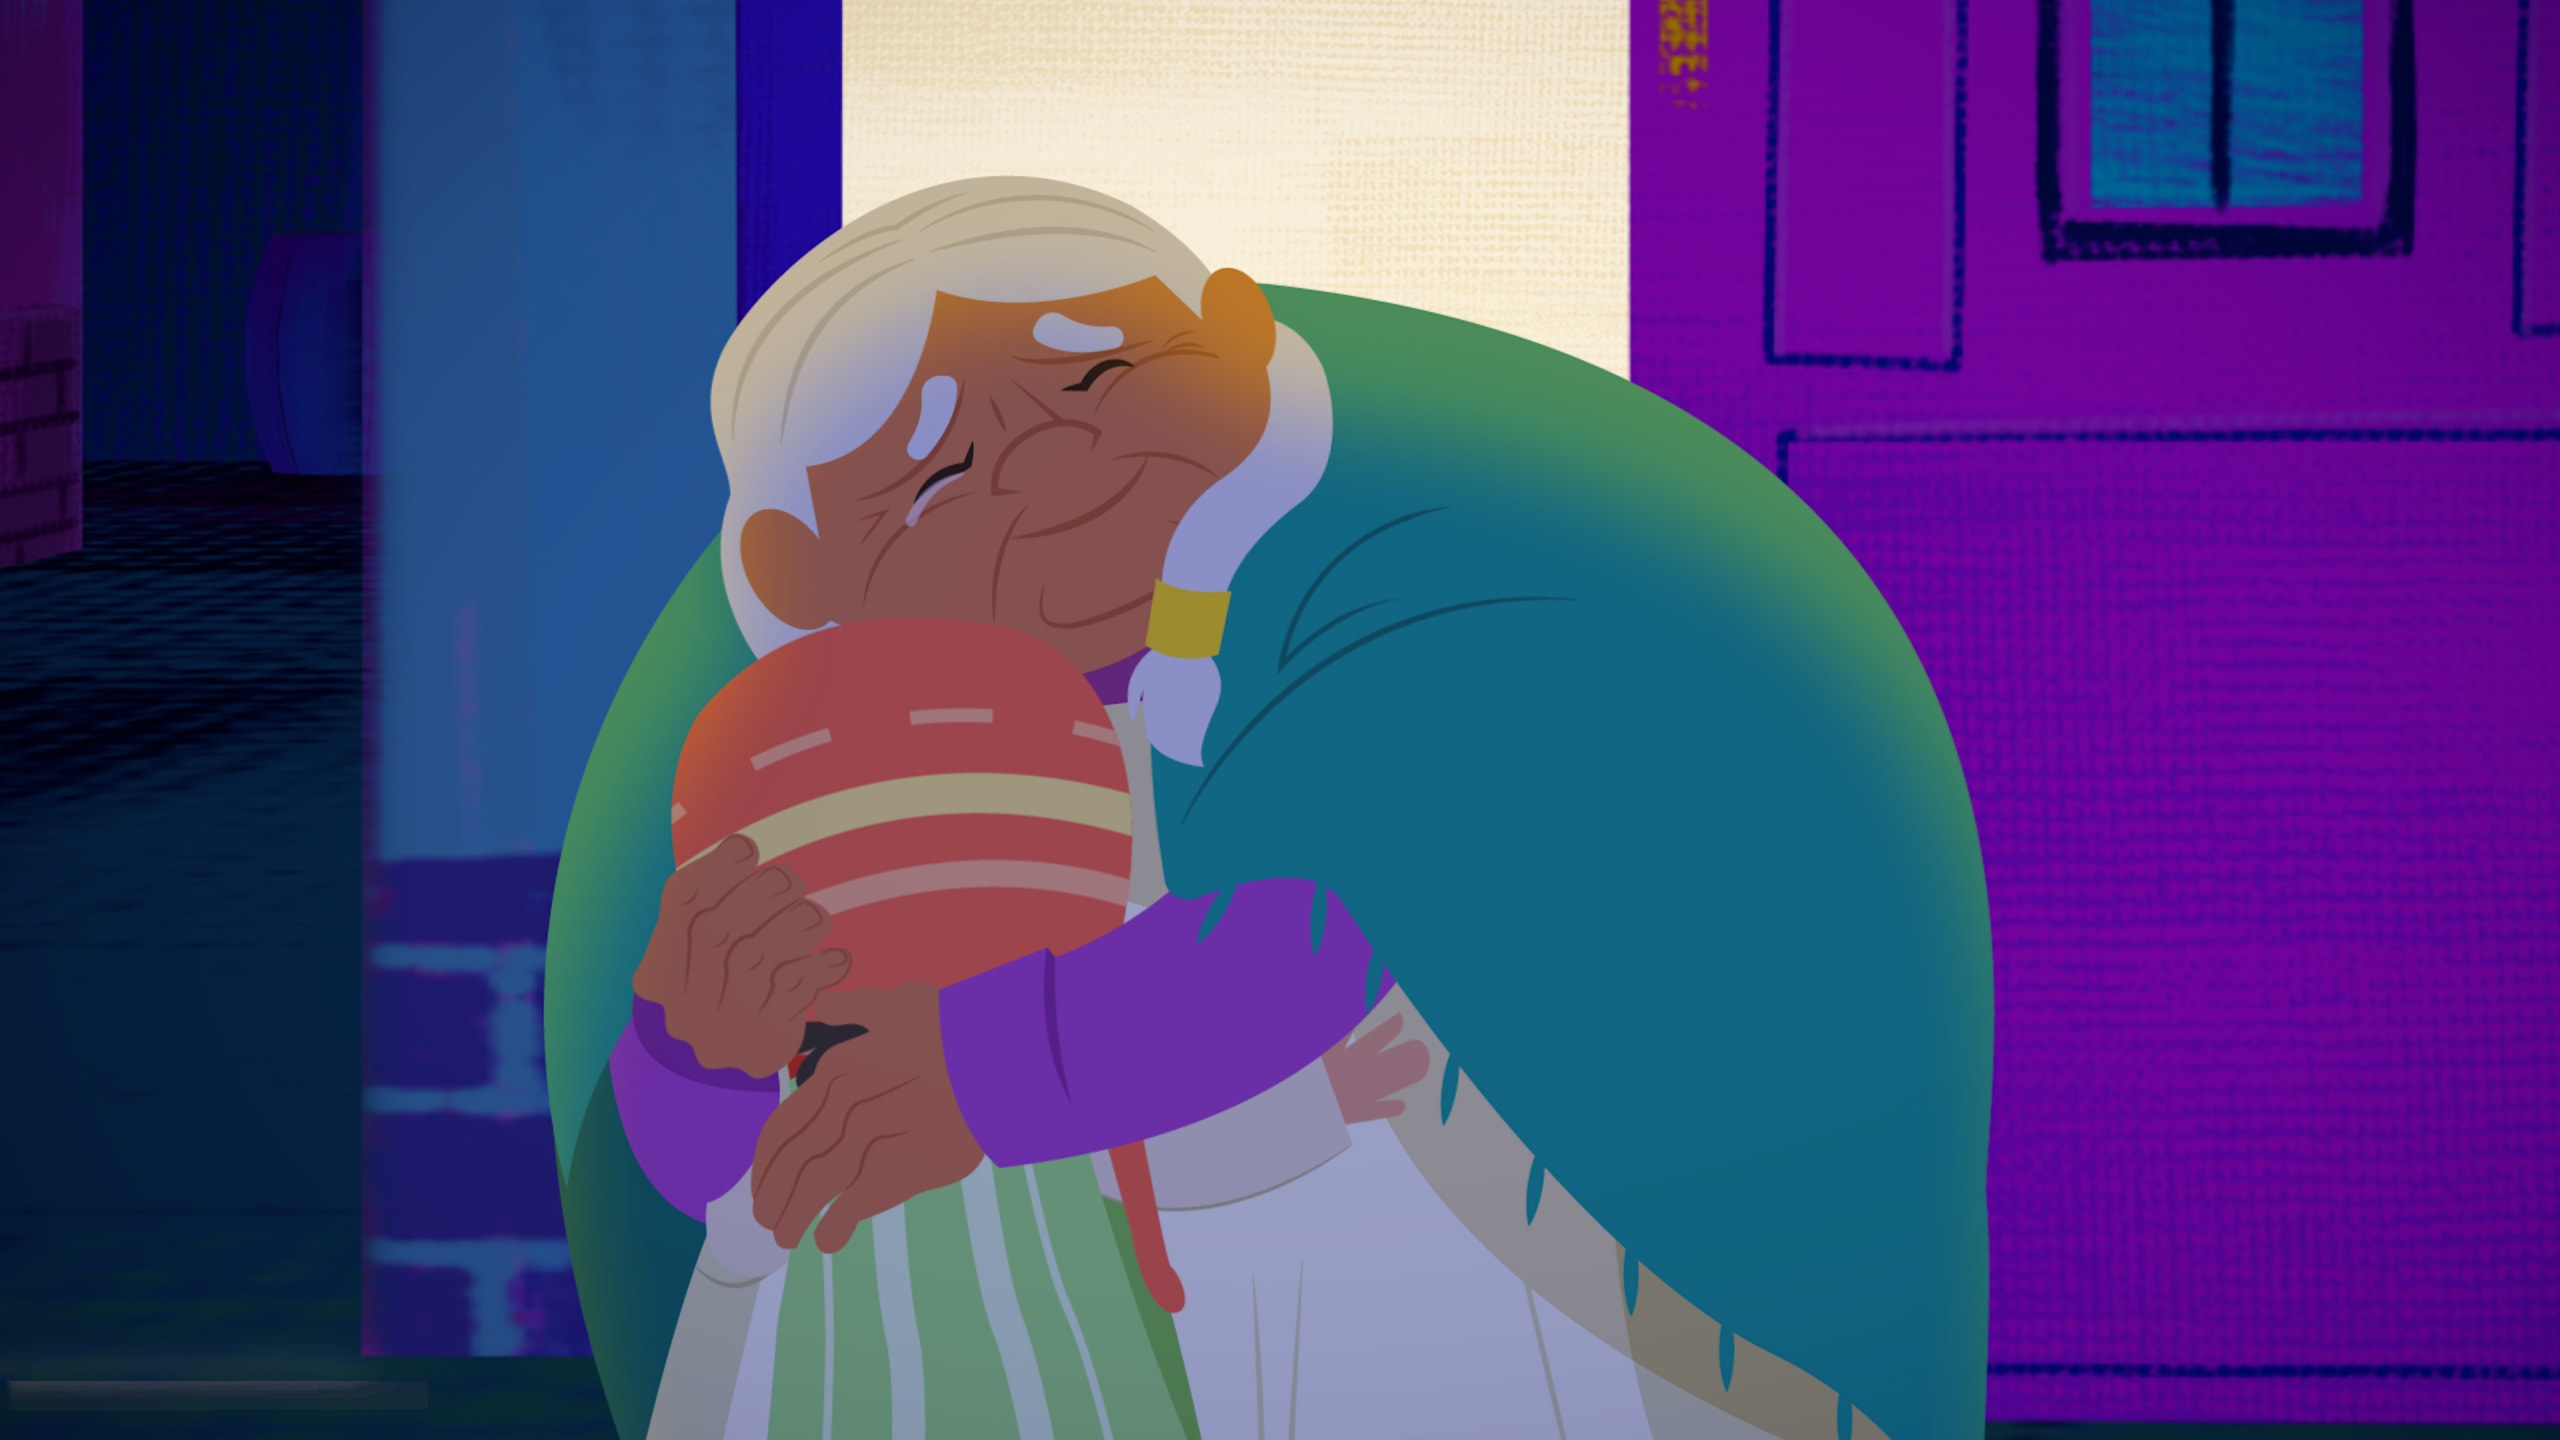 An elderly woman with white hair and a blue shawl hugs a boy in a red and yellow hat